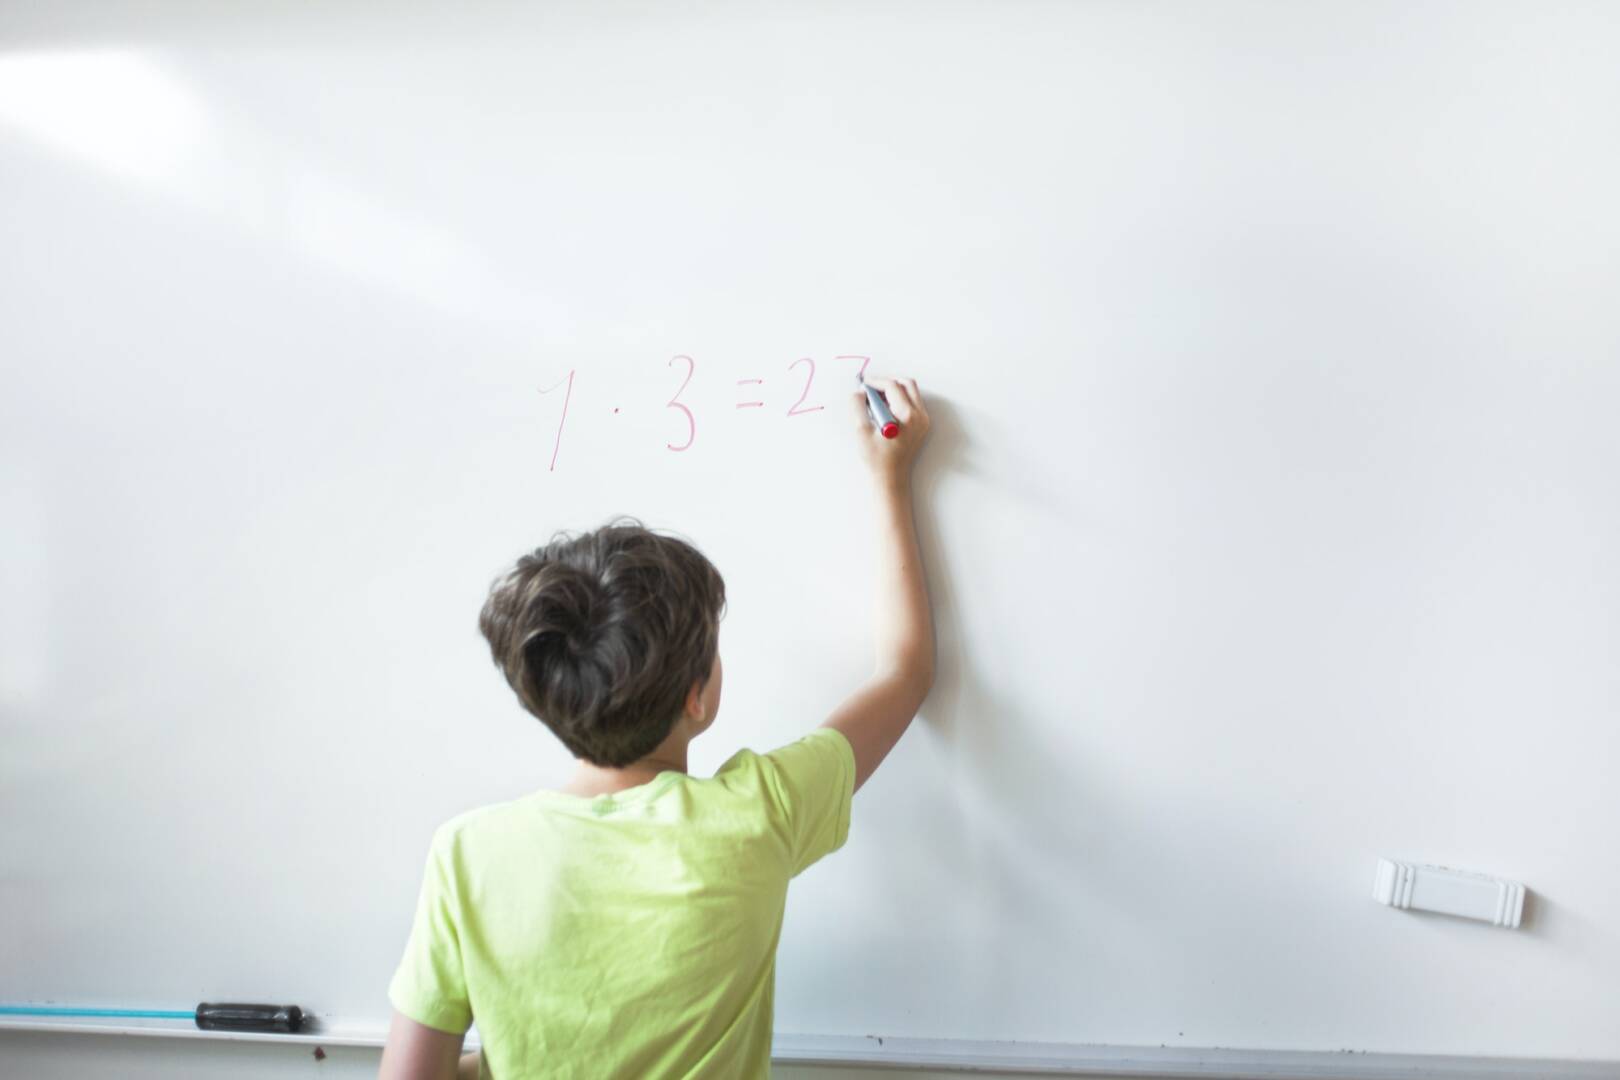 Rear view of schoolboy solving mathematics on whiteboard in classroom